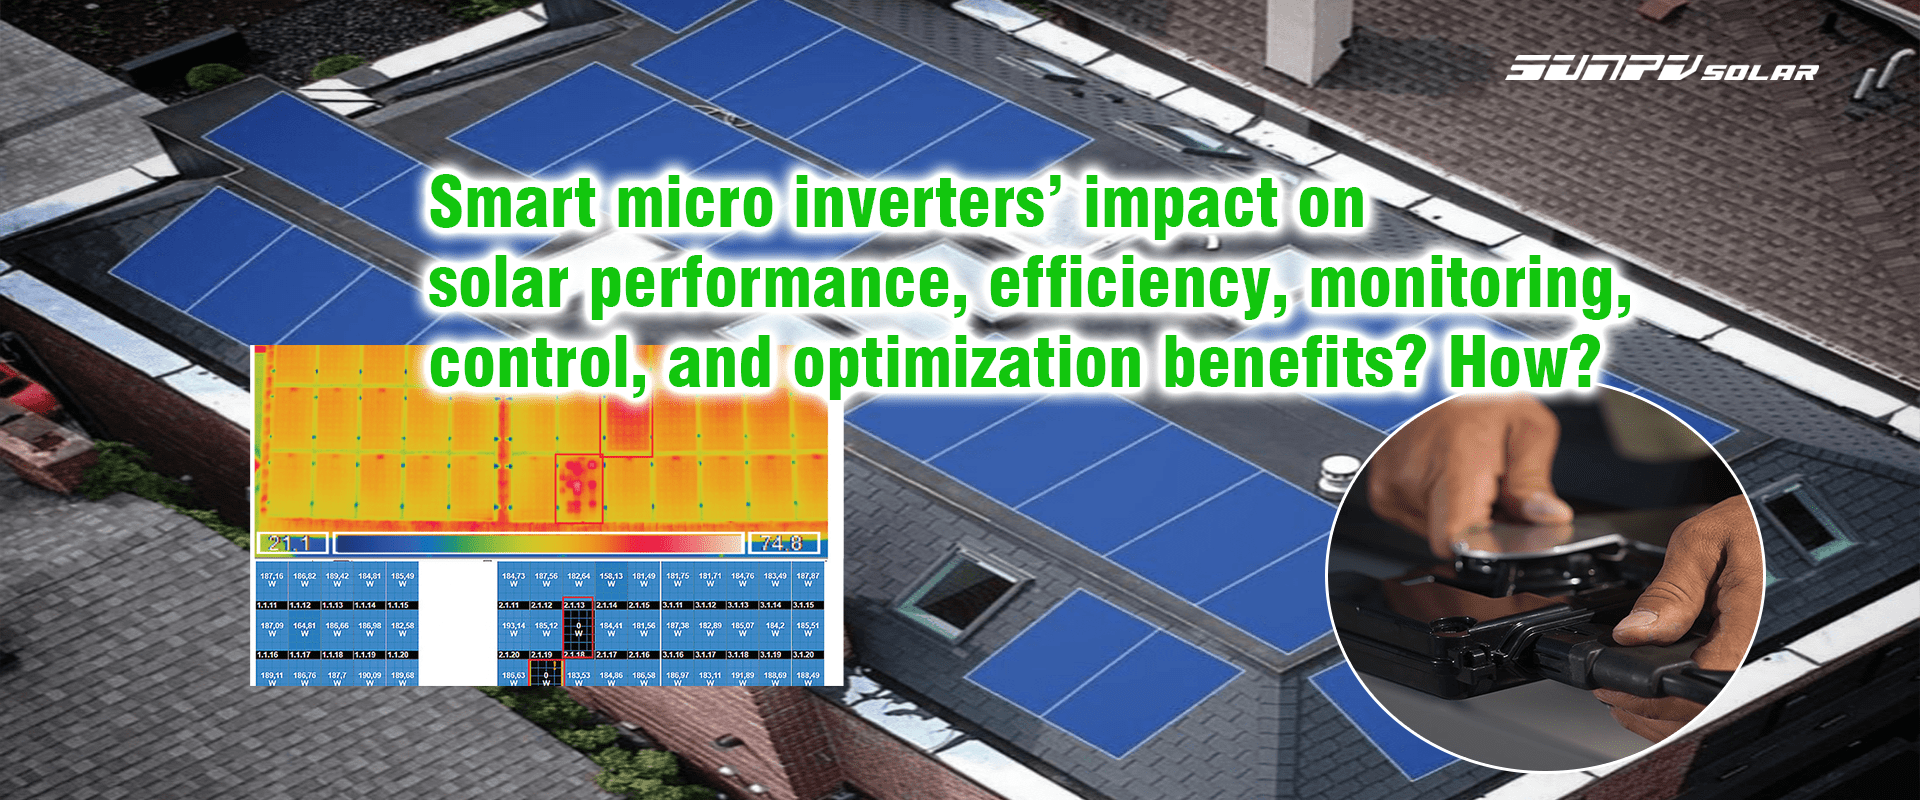 Smart micro inverters' impact on solar performance, efficiency, monitoring, control, and optimization benefits? How?